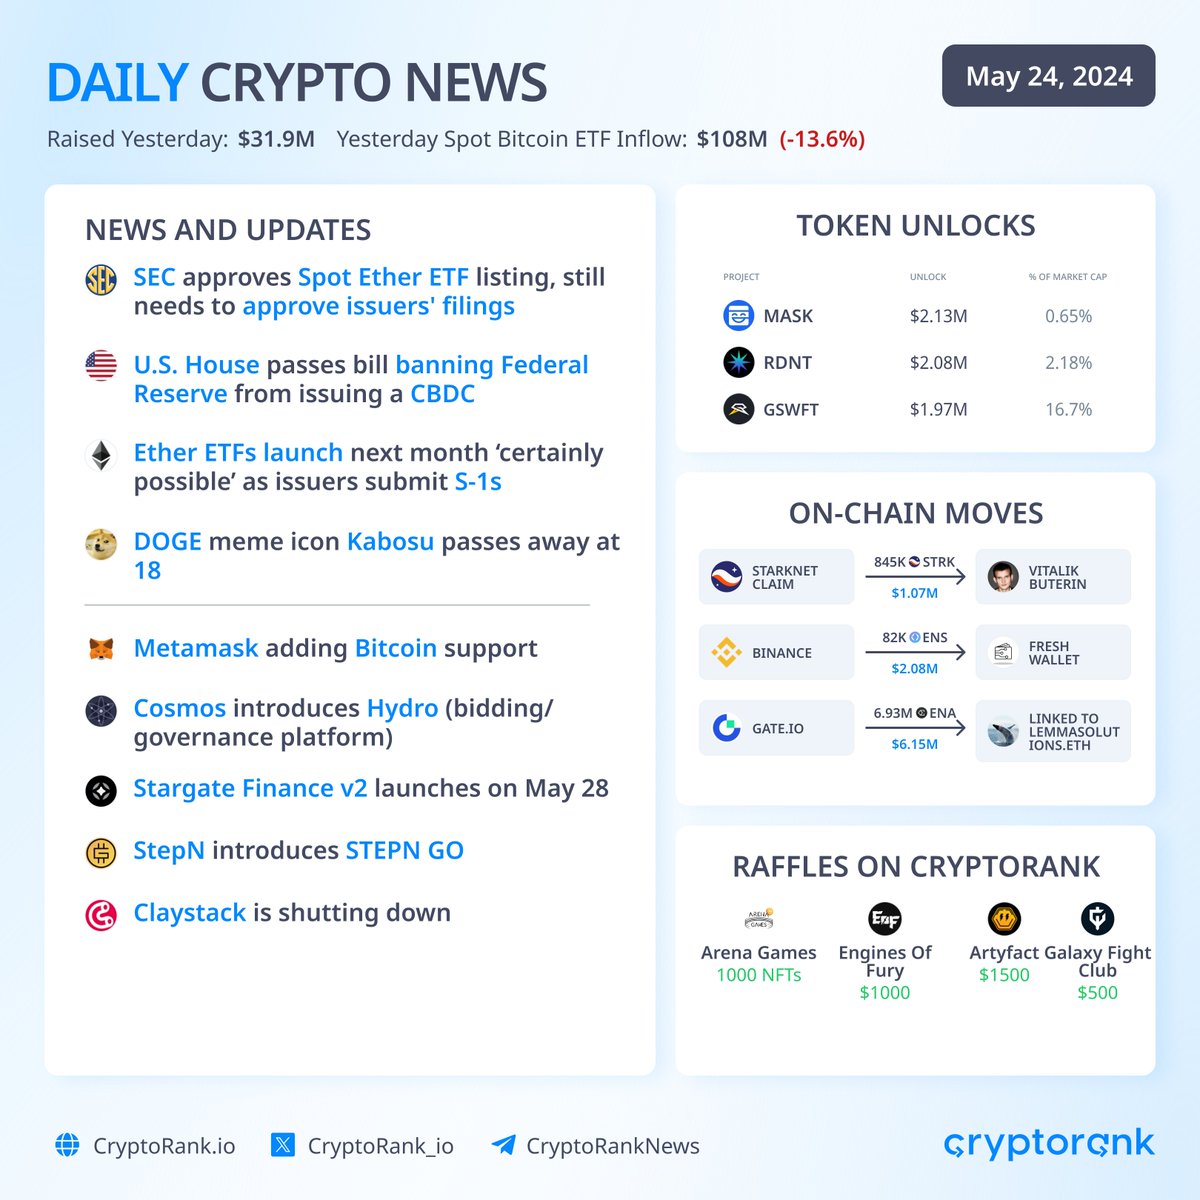 Daily Crypto News 📣 👉 News: — SEC approves Spot Ether ETF listing, still needs to approve issuers' filings — U.S. House passes bill banning Federal Reserve From Issuing a CBDC — Ether ETFs launch next month ‘certainly possible’ as issuers submit S-1s — $DOGE meme icon Kabosu